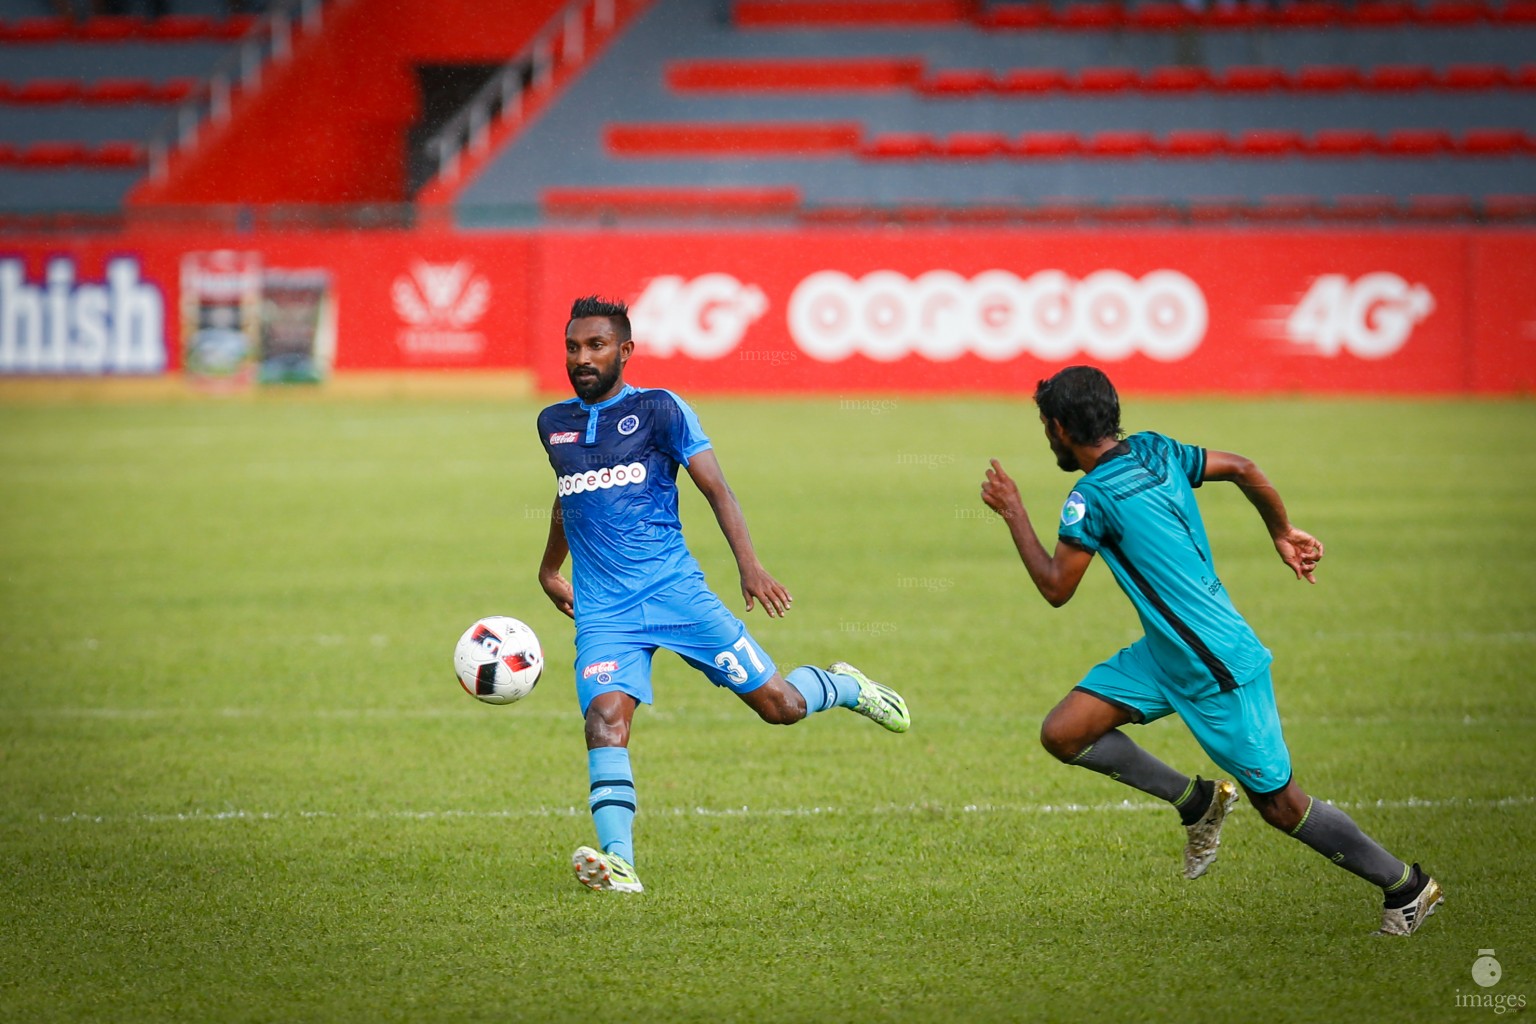 STO MAle' League 2018 (New Radiant SC vs Club Green Streets)